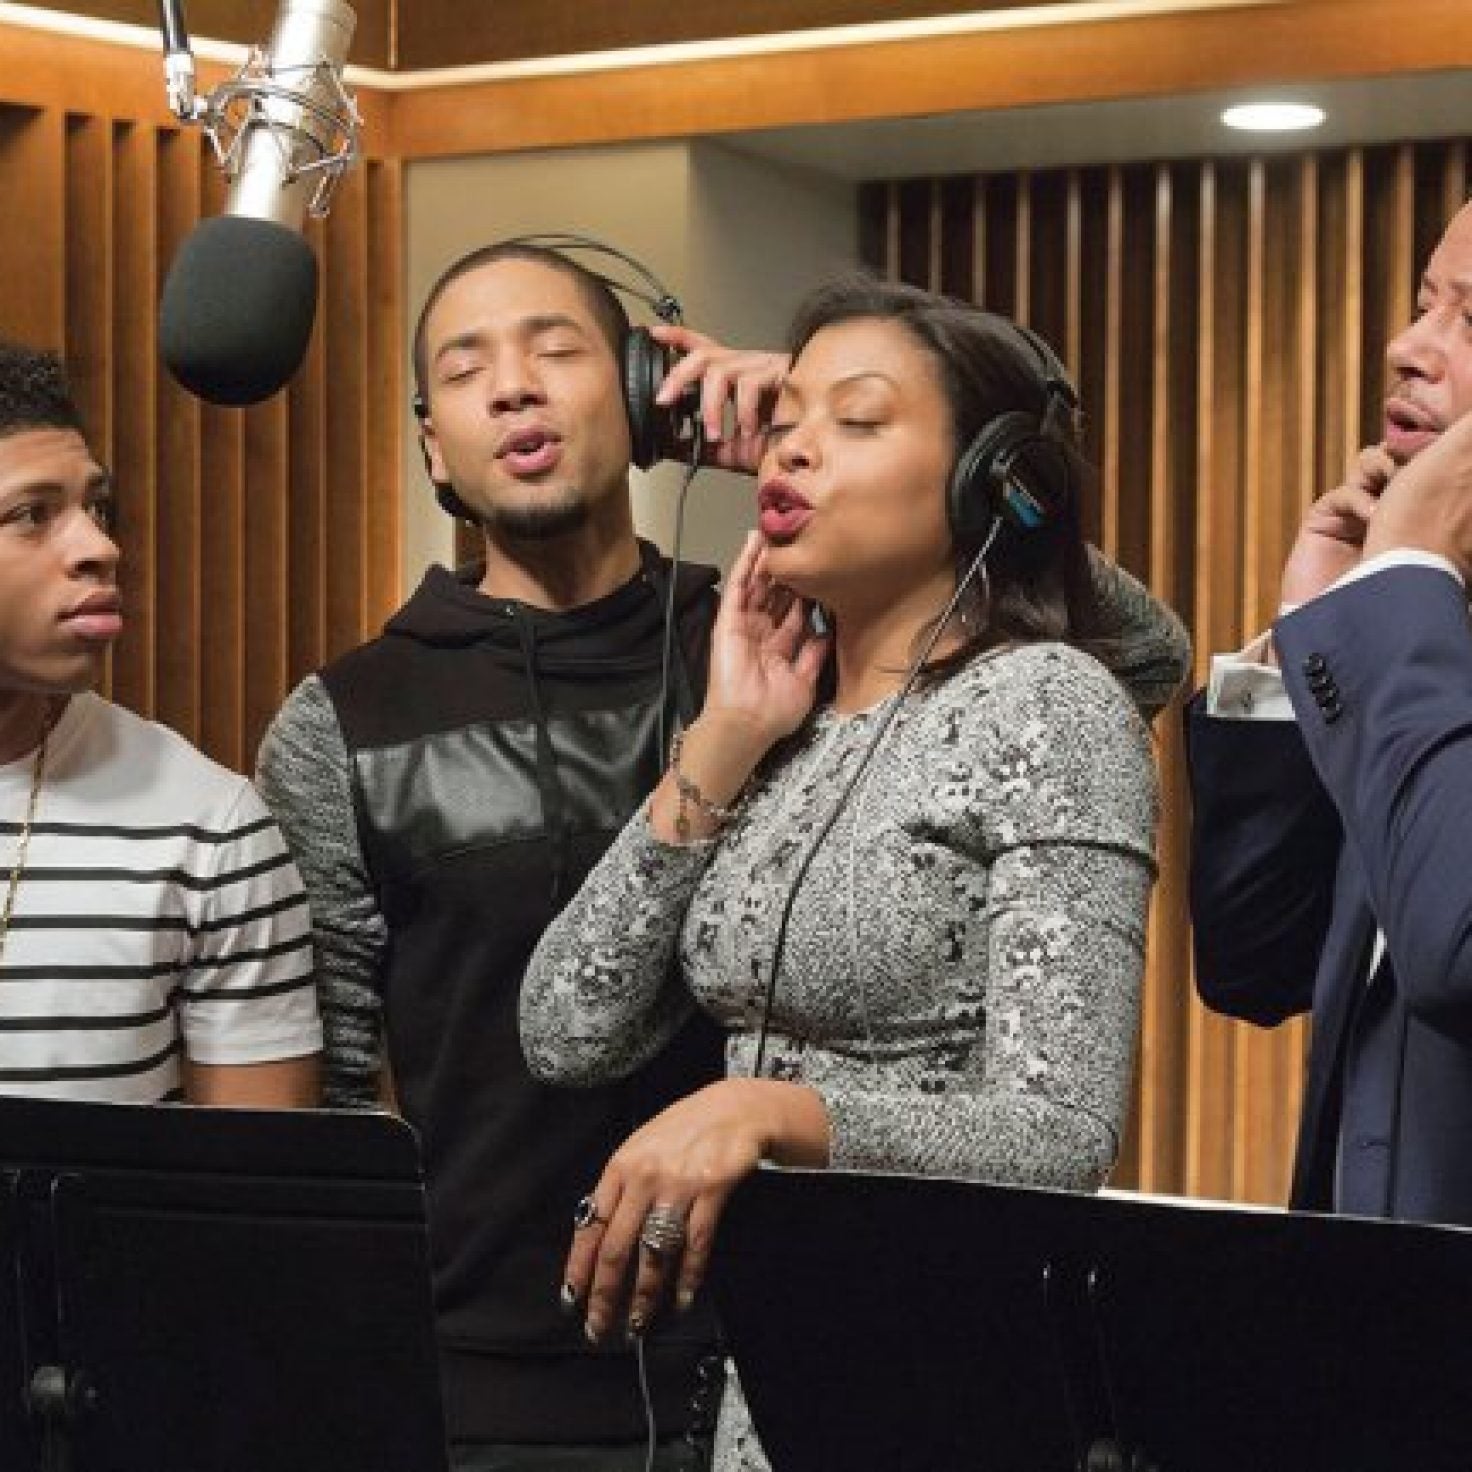 Lee Daniels Says He's 'Heartbroken' He Can't Shoot 'Empire' Finale Due To COVID-19